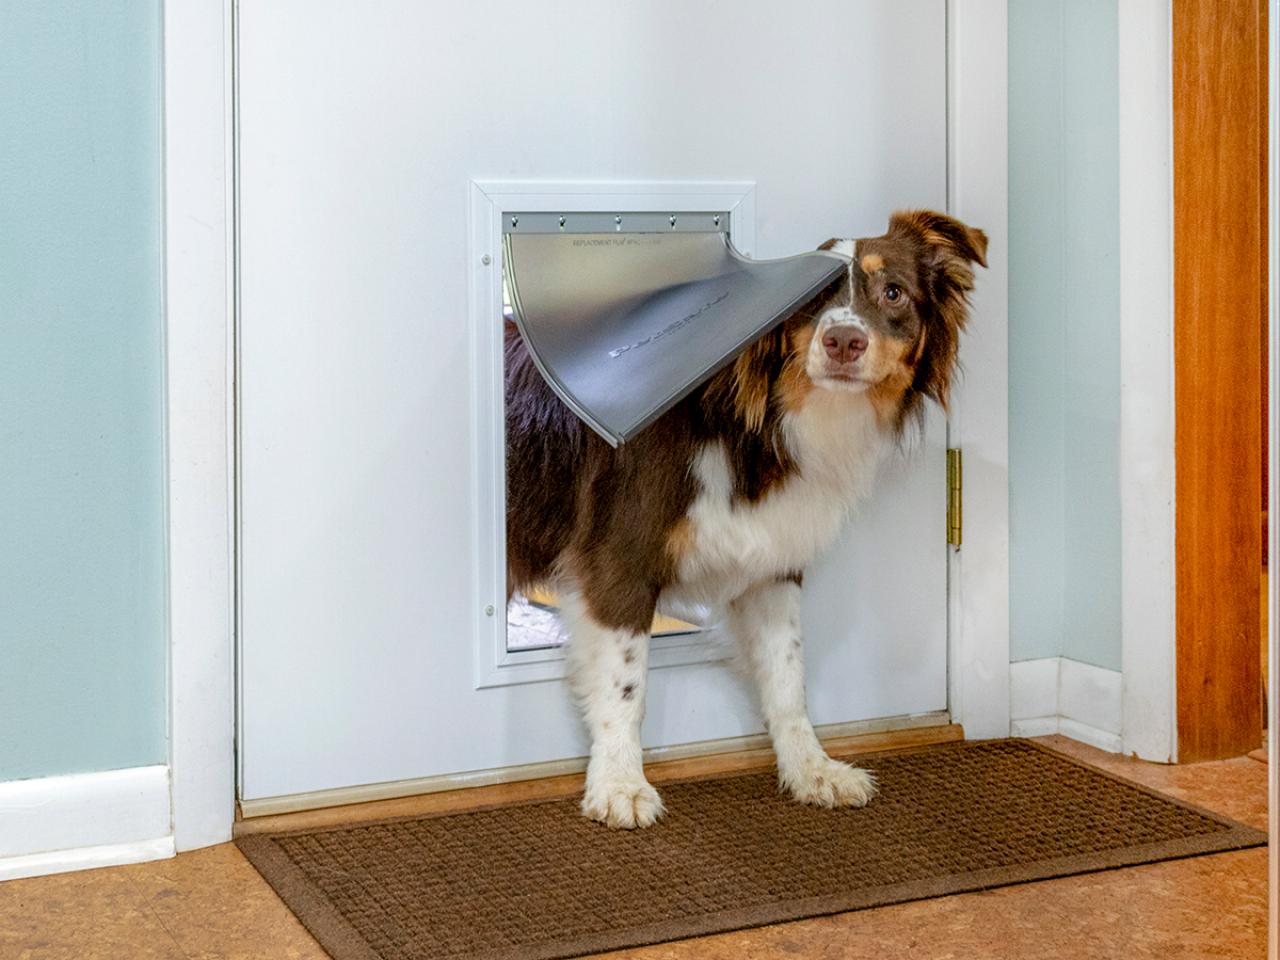 Best dog door for cold weather - 3 best recommendations